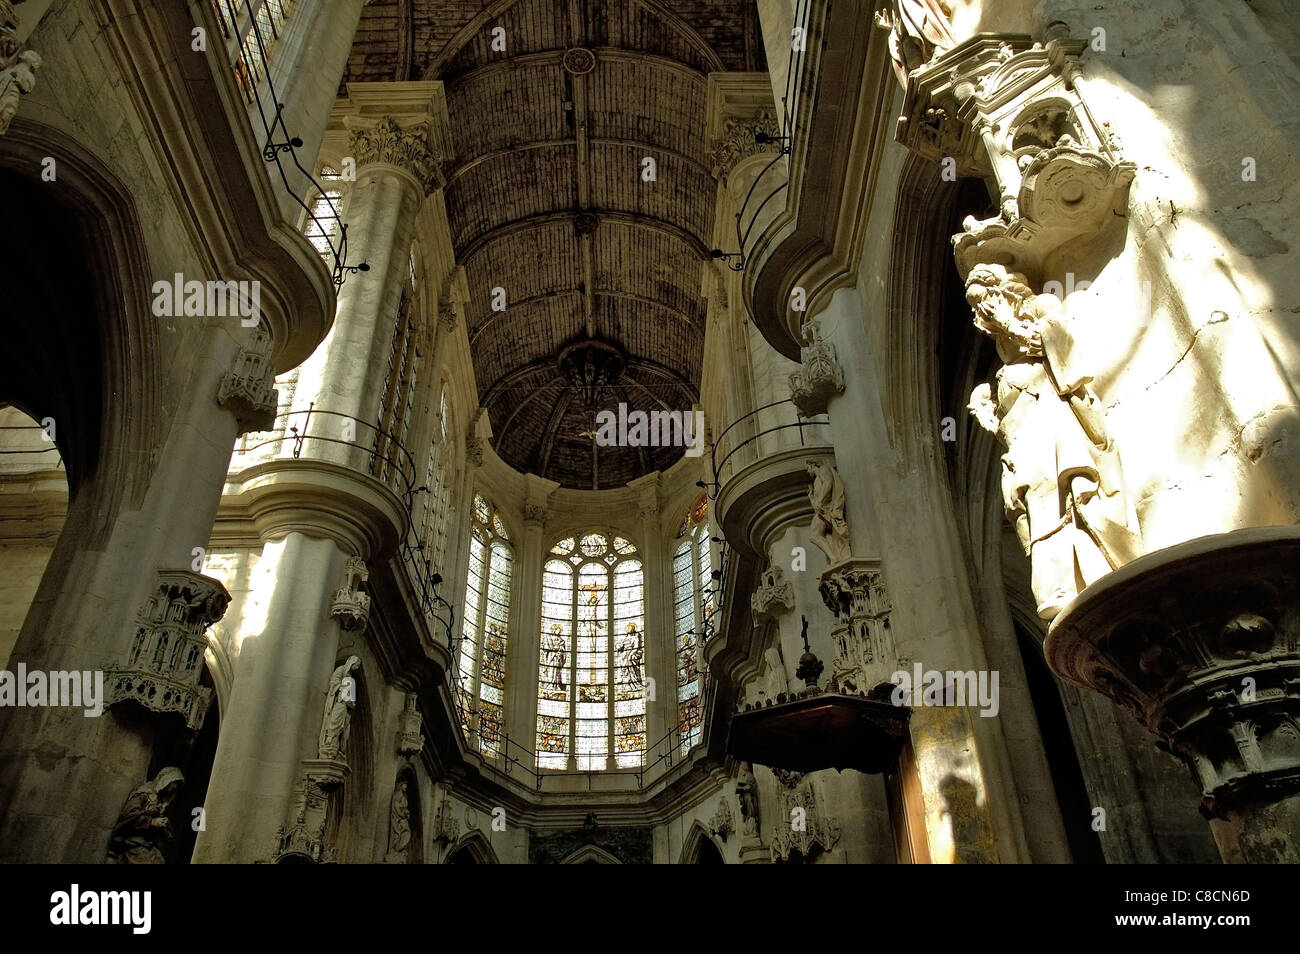 Troyes, France - Interior of The Church of St Pantaleon. Stock Photo